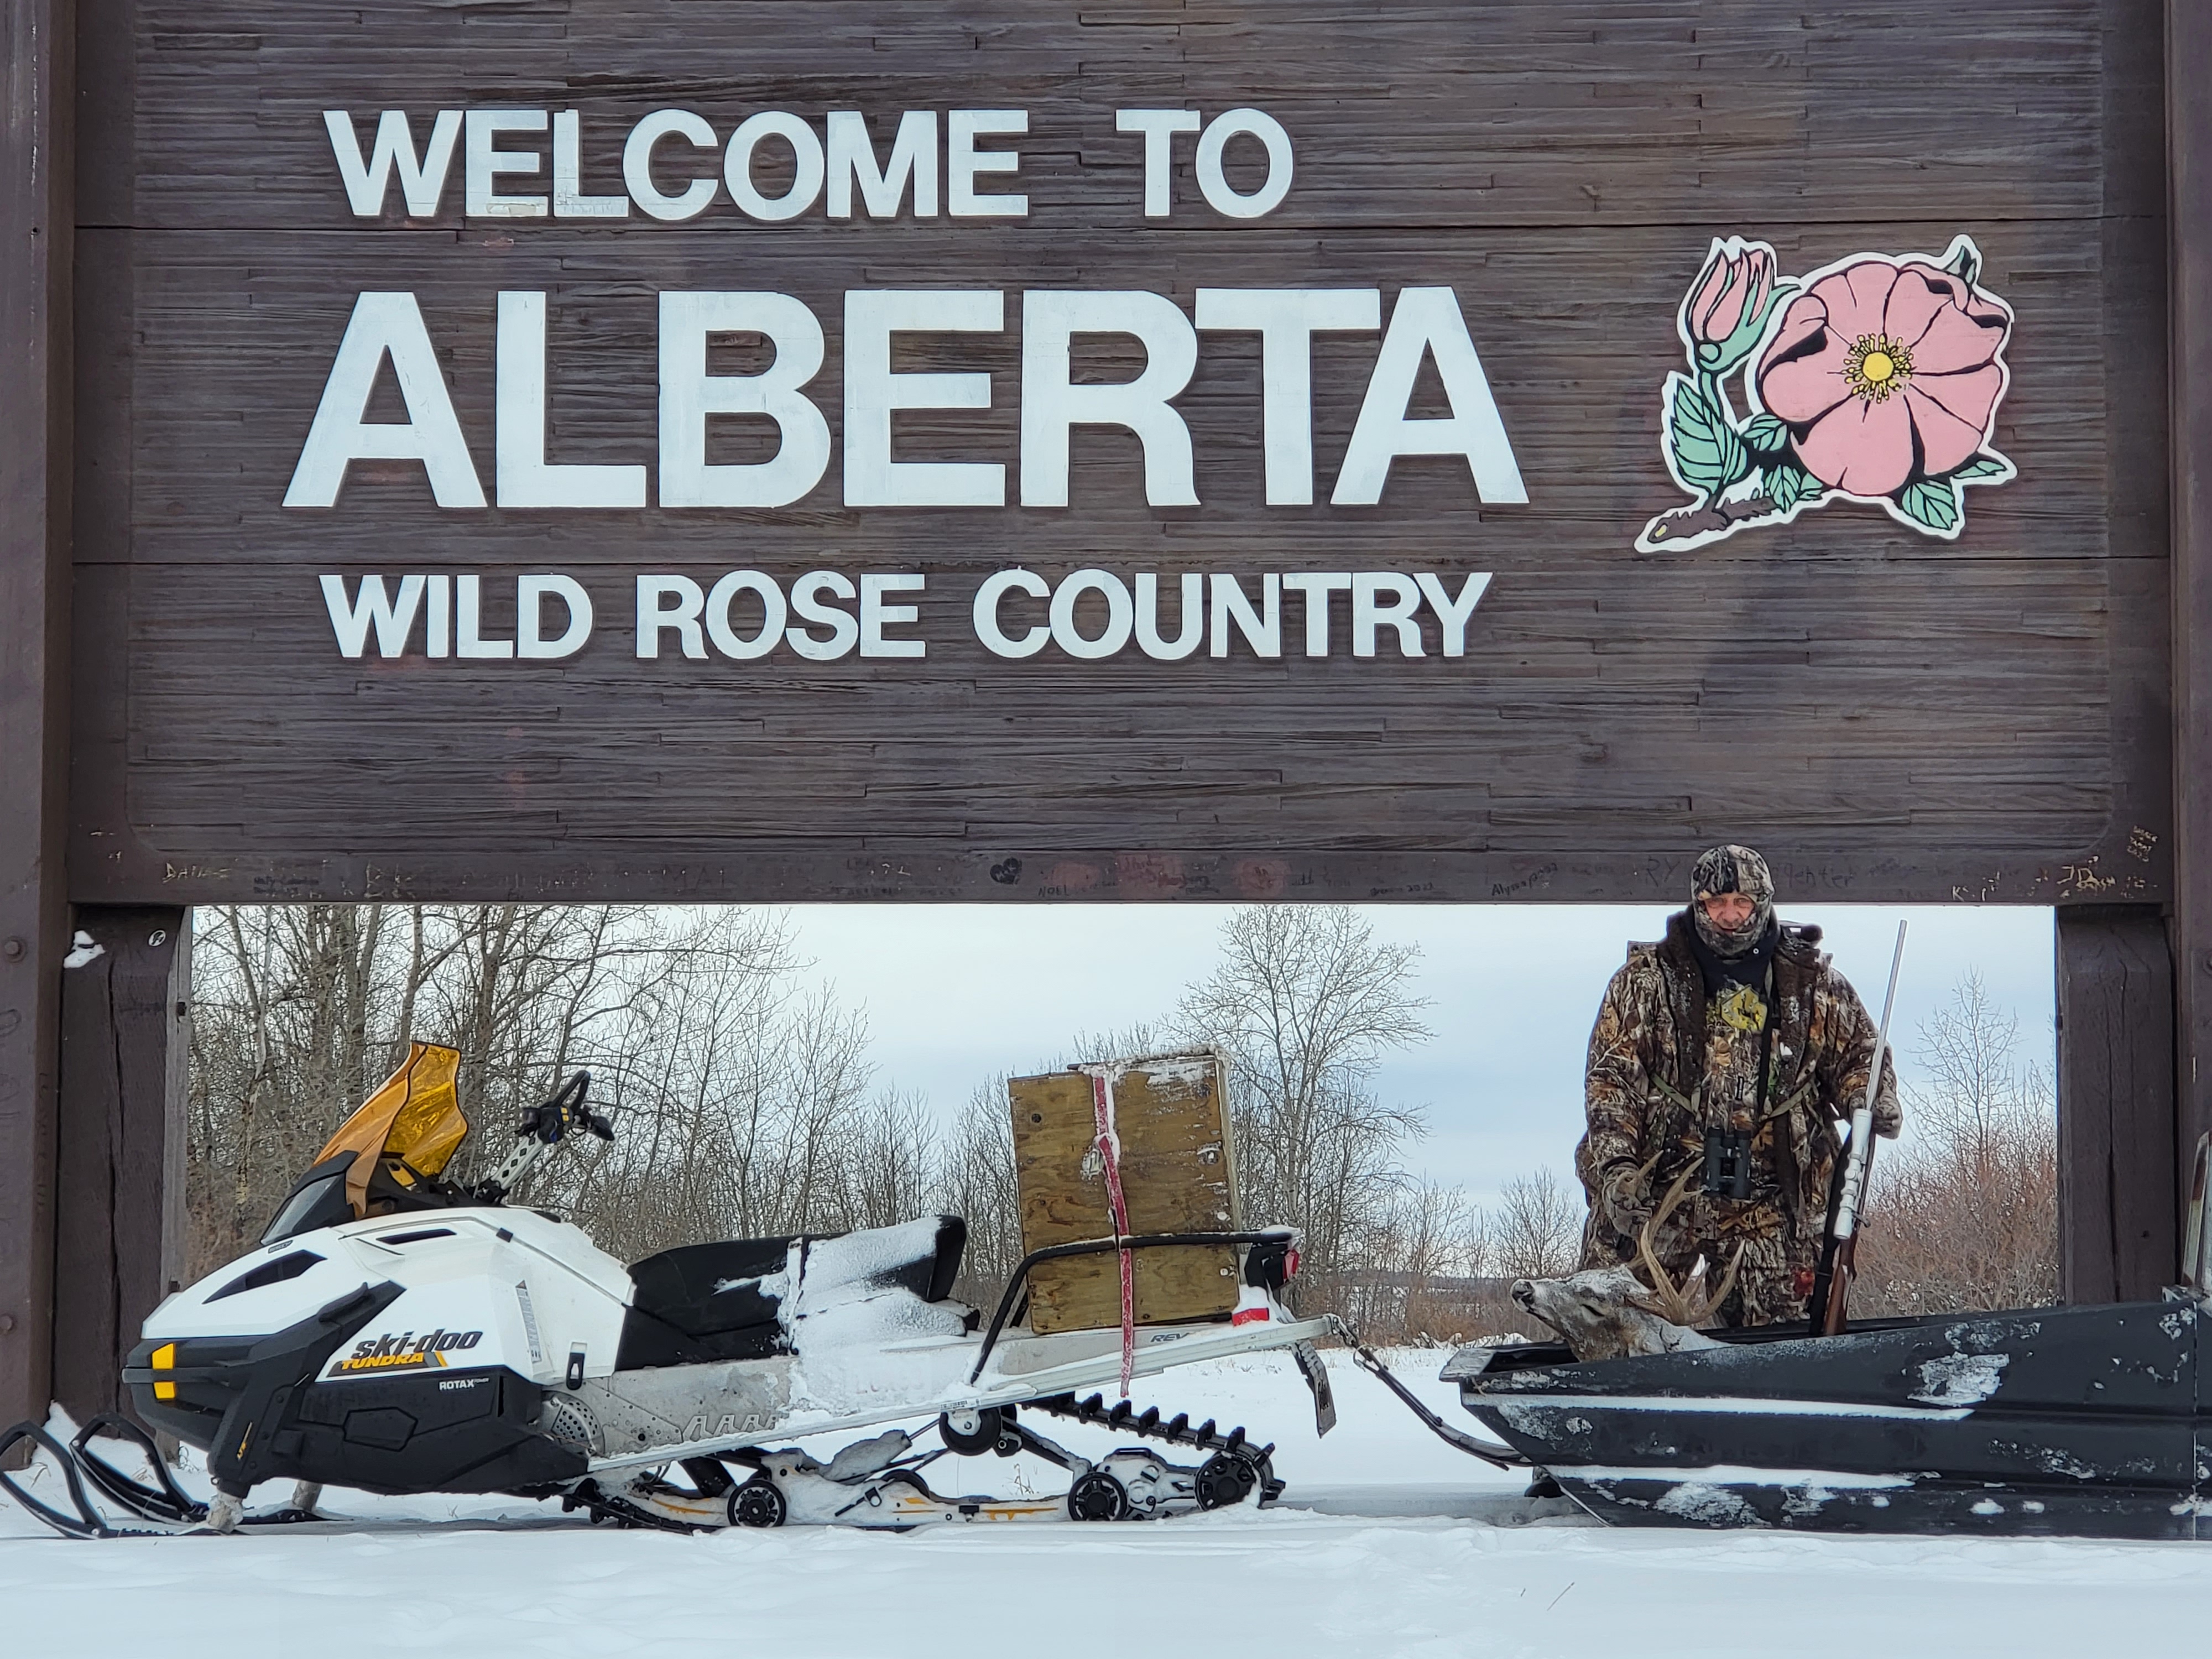 Welcome to Alberta sign